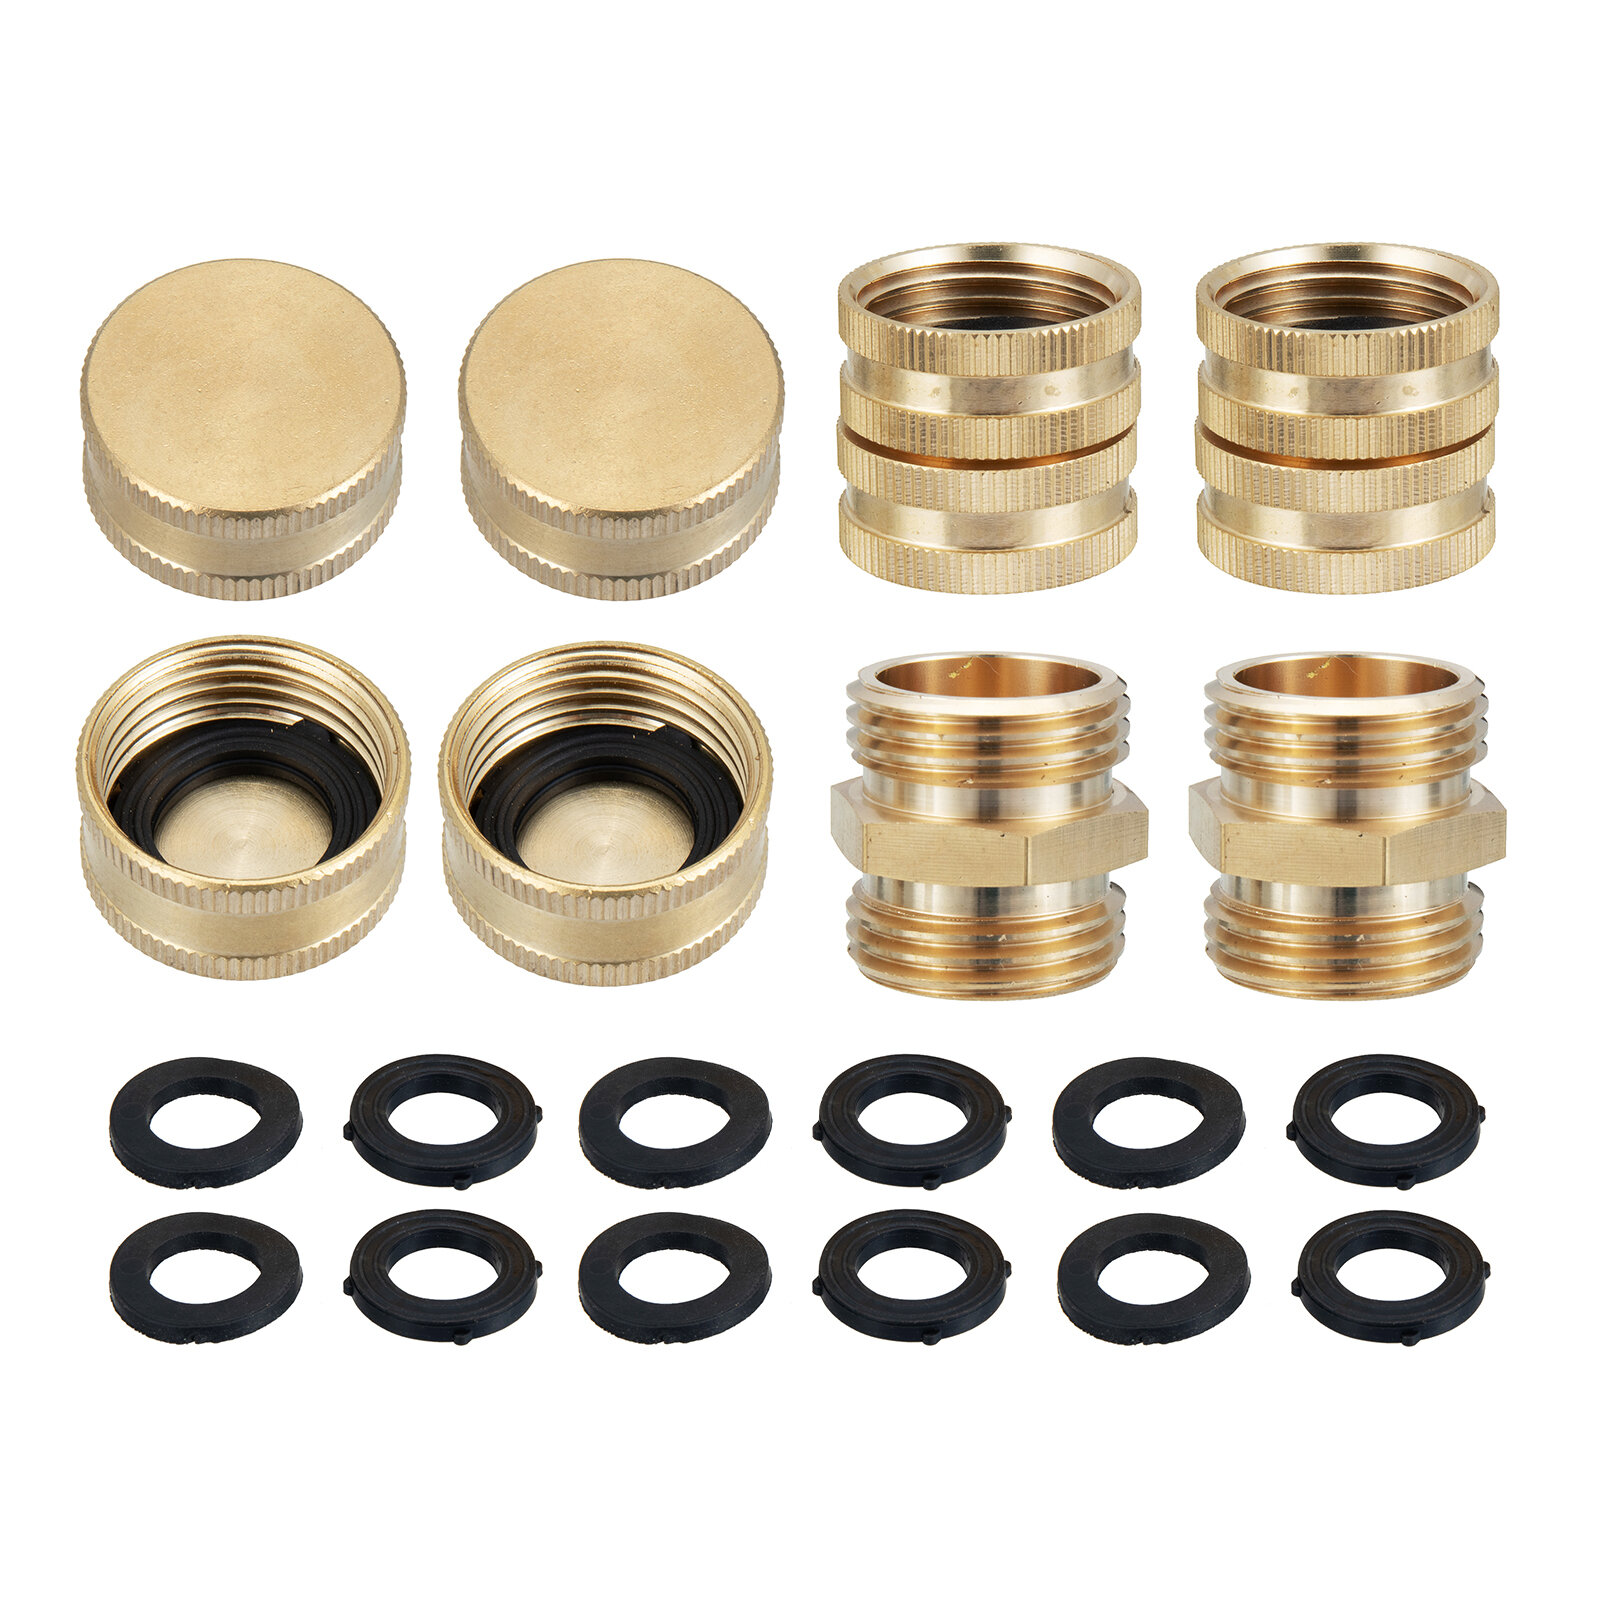 

MATCC Garden Hose Adapter Hose End Caps 3/4 Inch GHT Brass Hose Connector Male to Male Female to Female Fittings 2 Kits